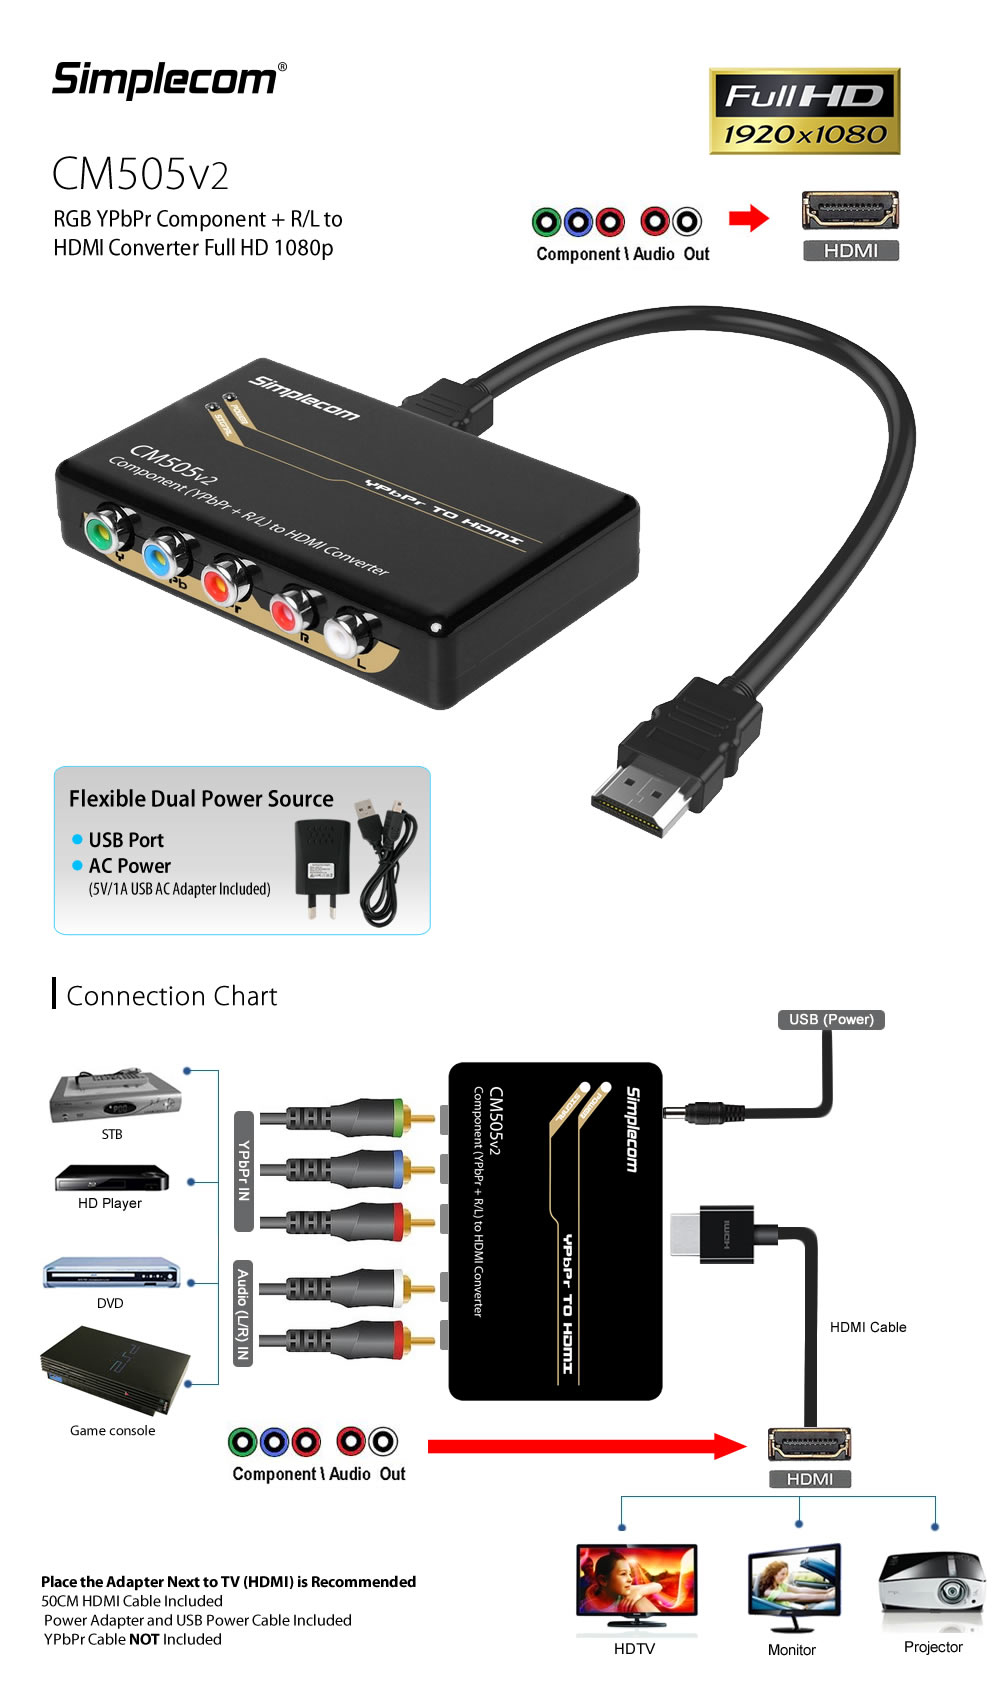 Display-Adapters-Simplecom-CM505v2-YPbPr-Stereo-R-L-to-HDMI-Converter-FHD-1080p-1